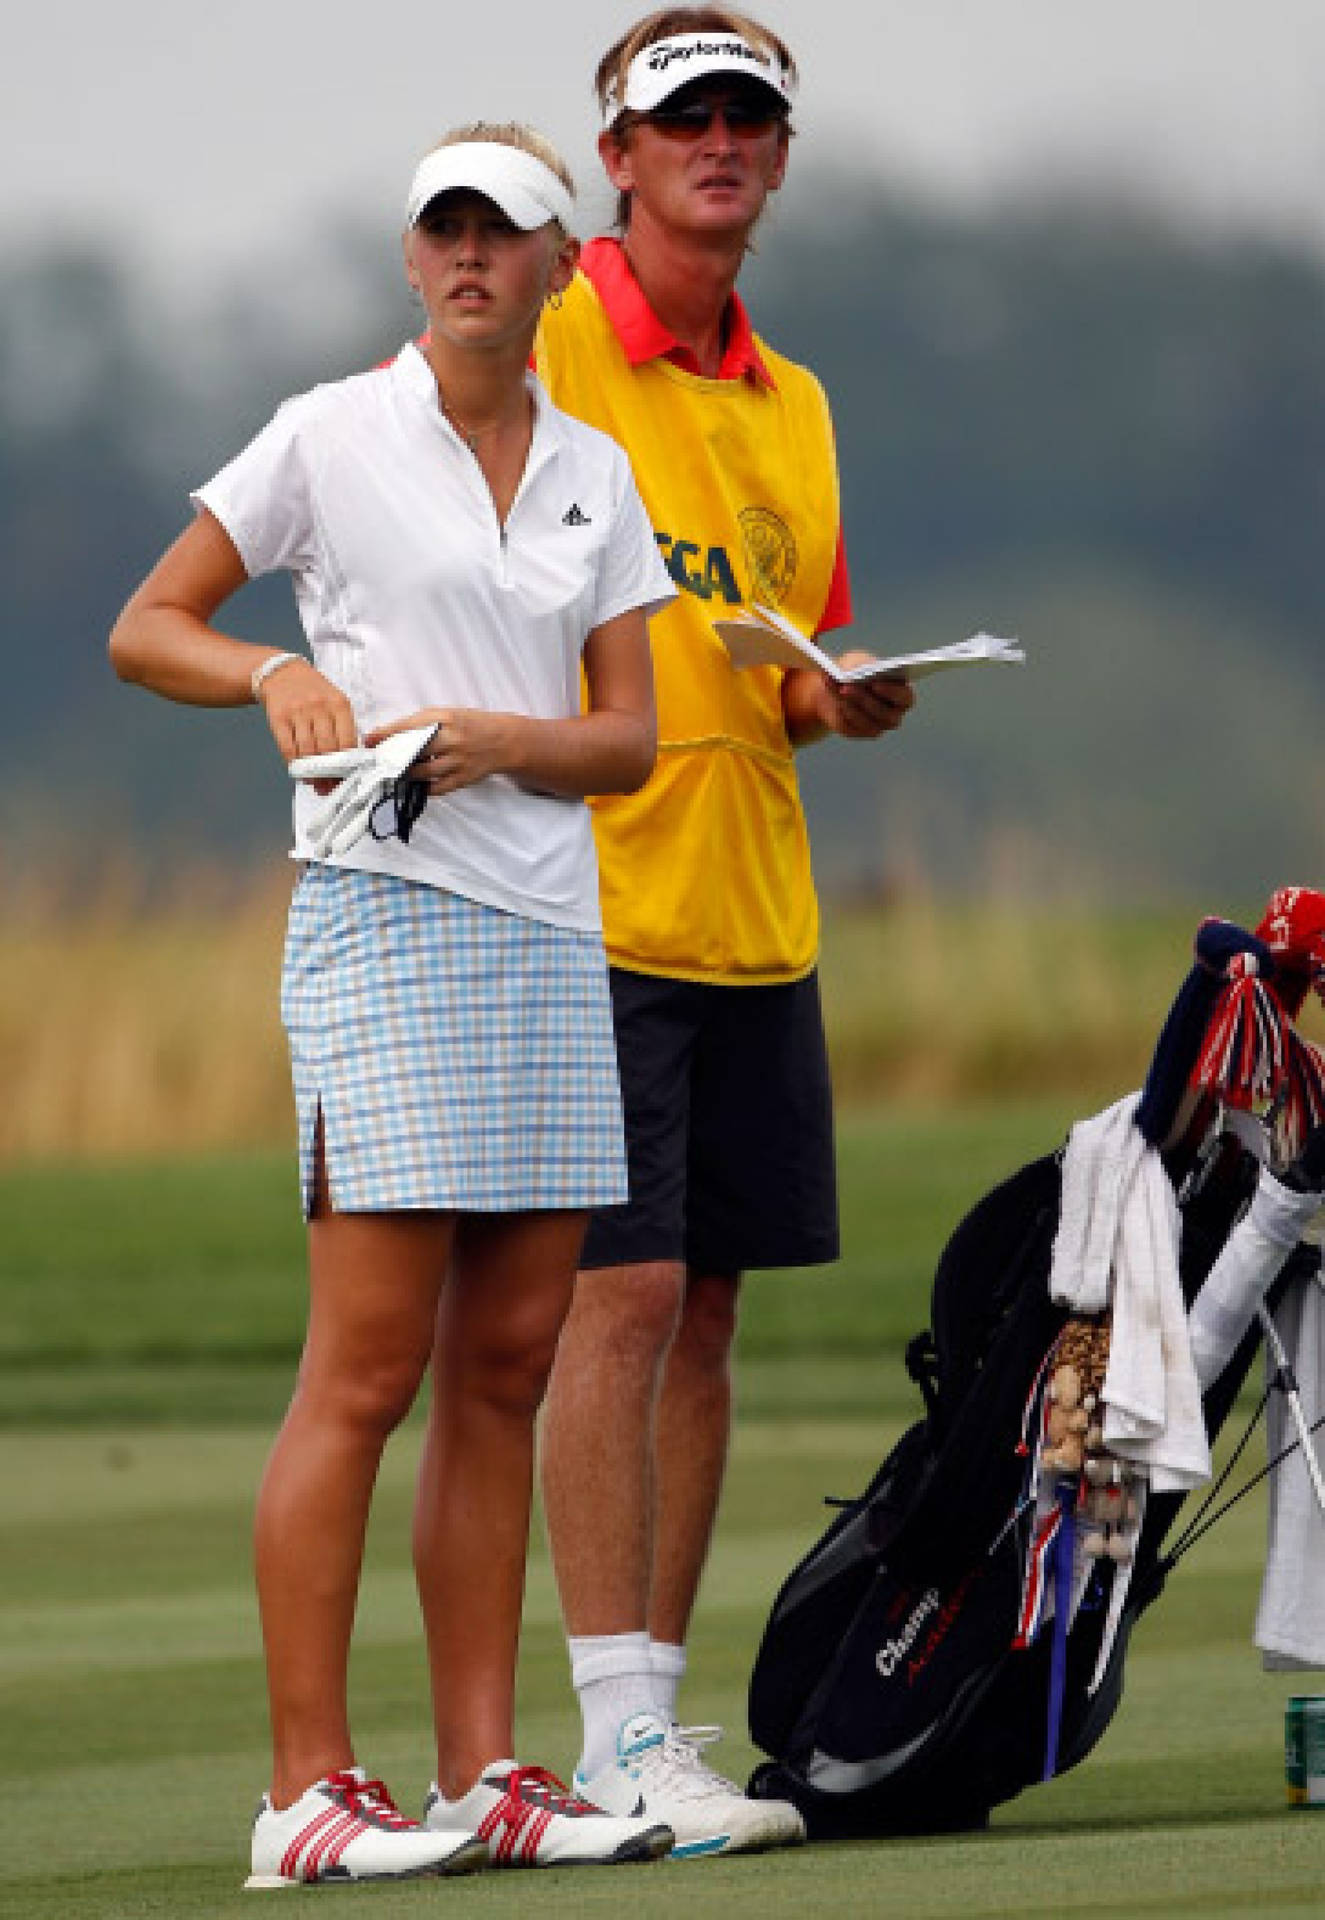 Former Tennis Star Petr Korda with his Daughter on the Golf Course Wallpaper